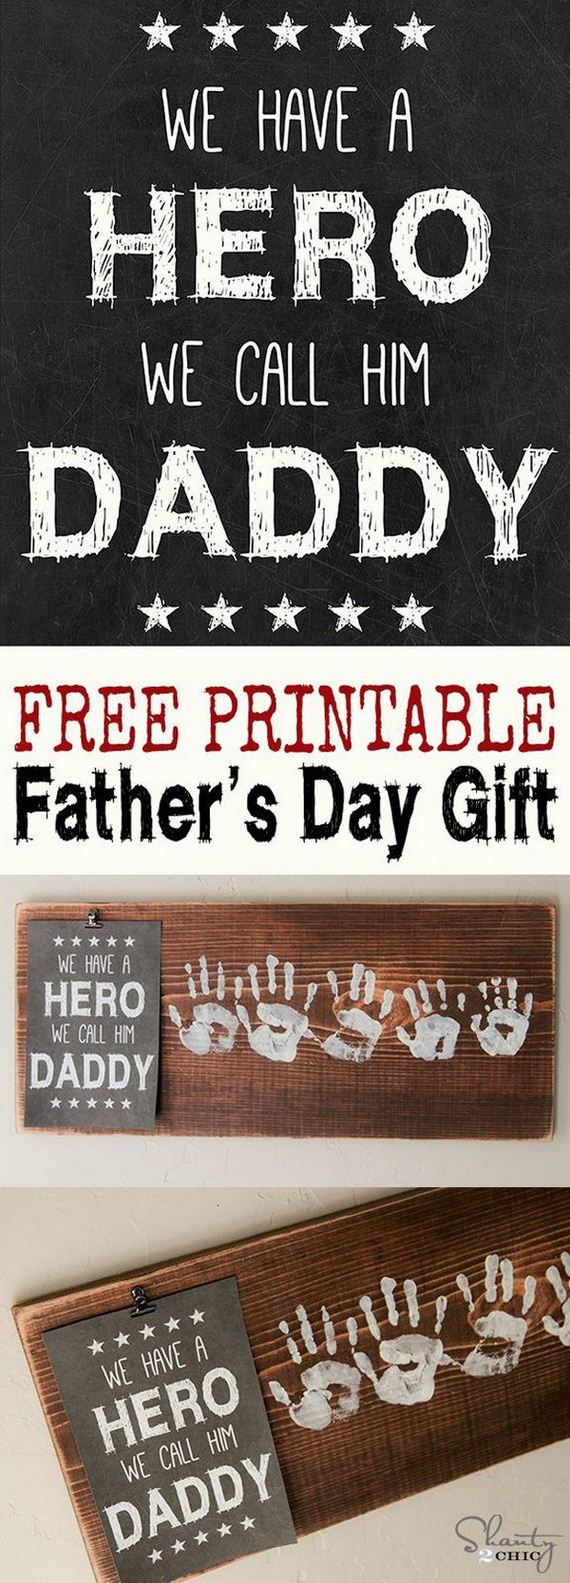 01-diy-fathers-day-gift-ideas